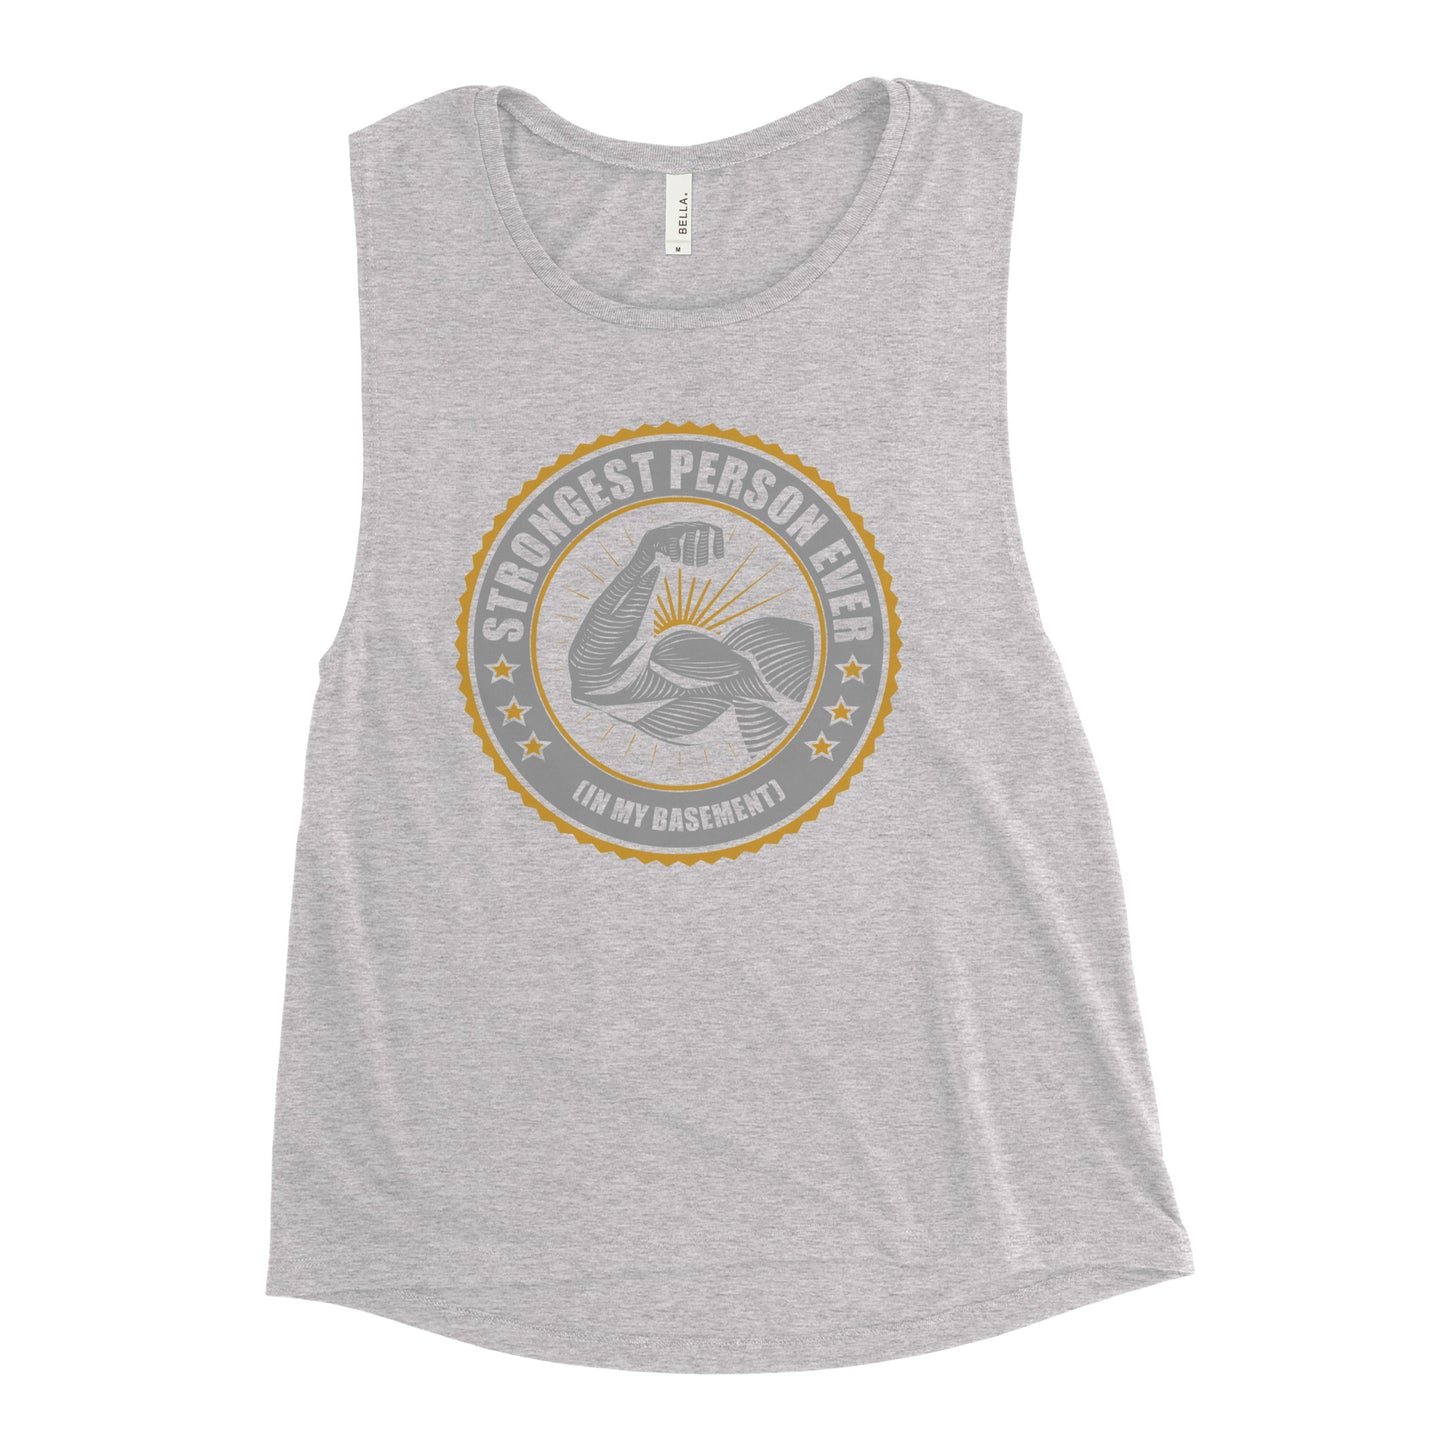 Strongest Person Ever Ladies’ Muscle Tank